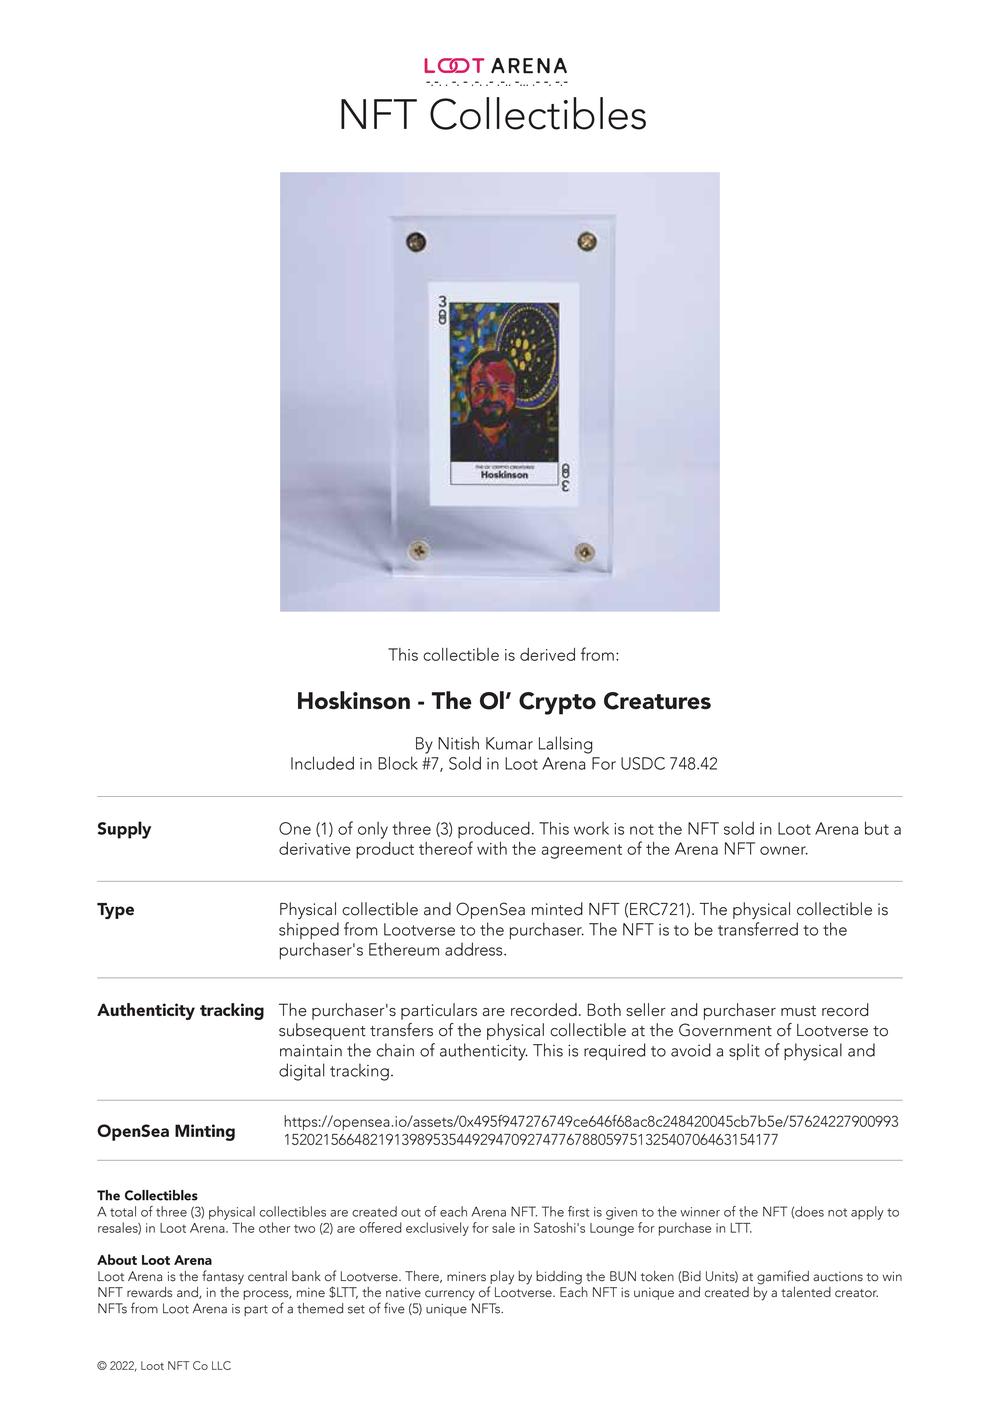 Hoskinson_#1 Collectible_Contract.pdf